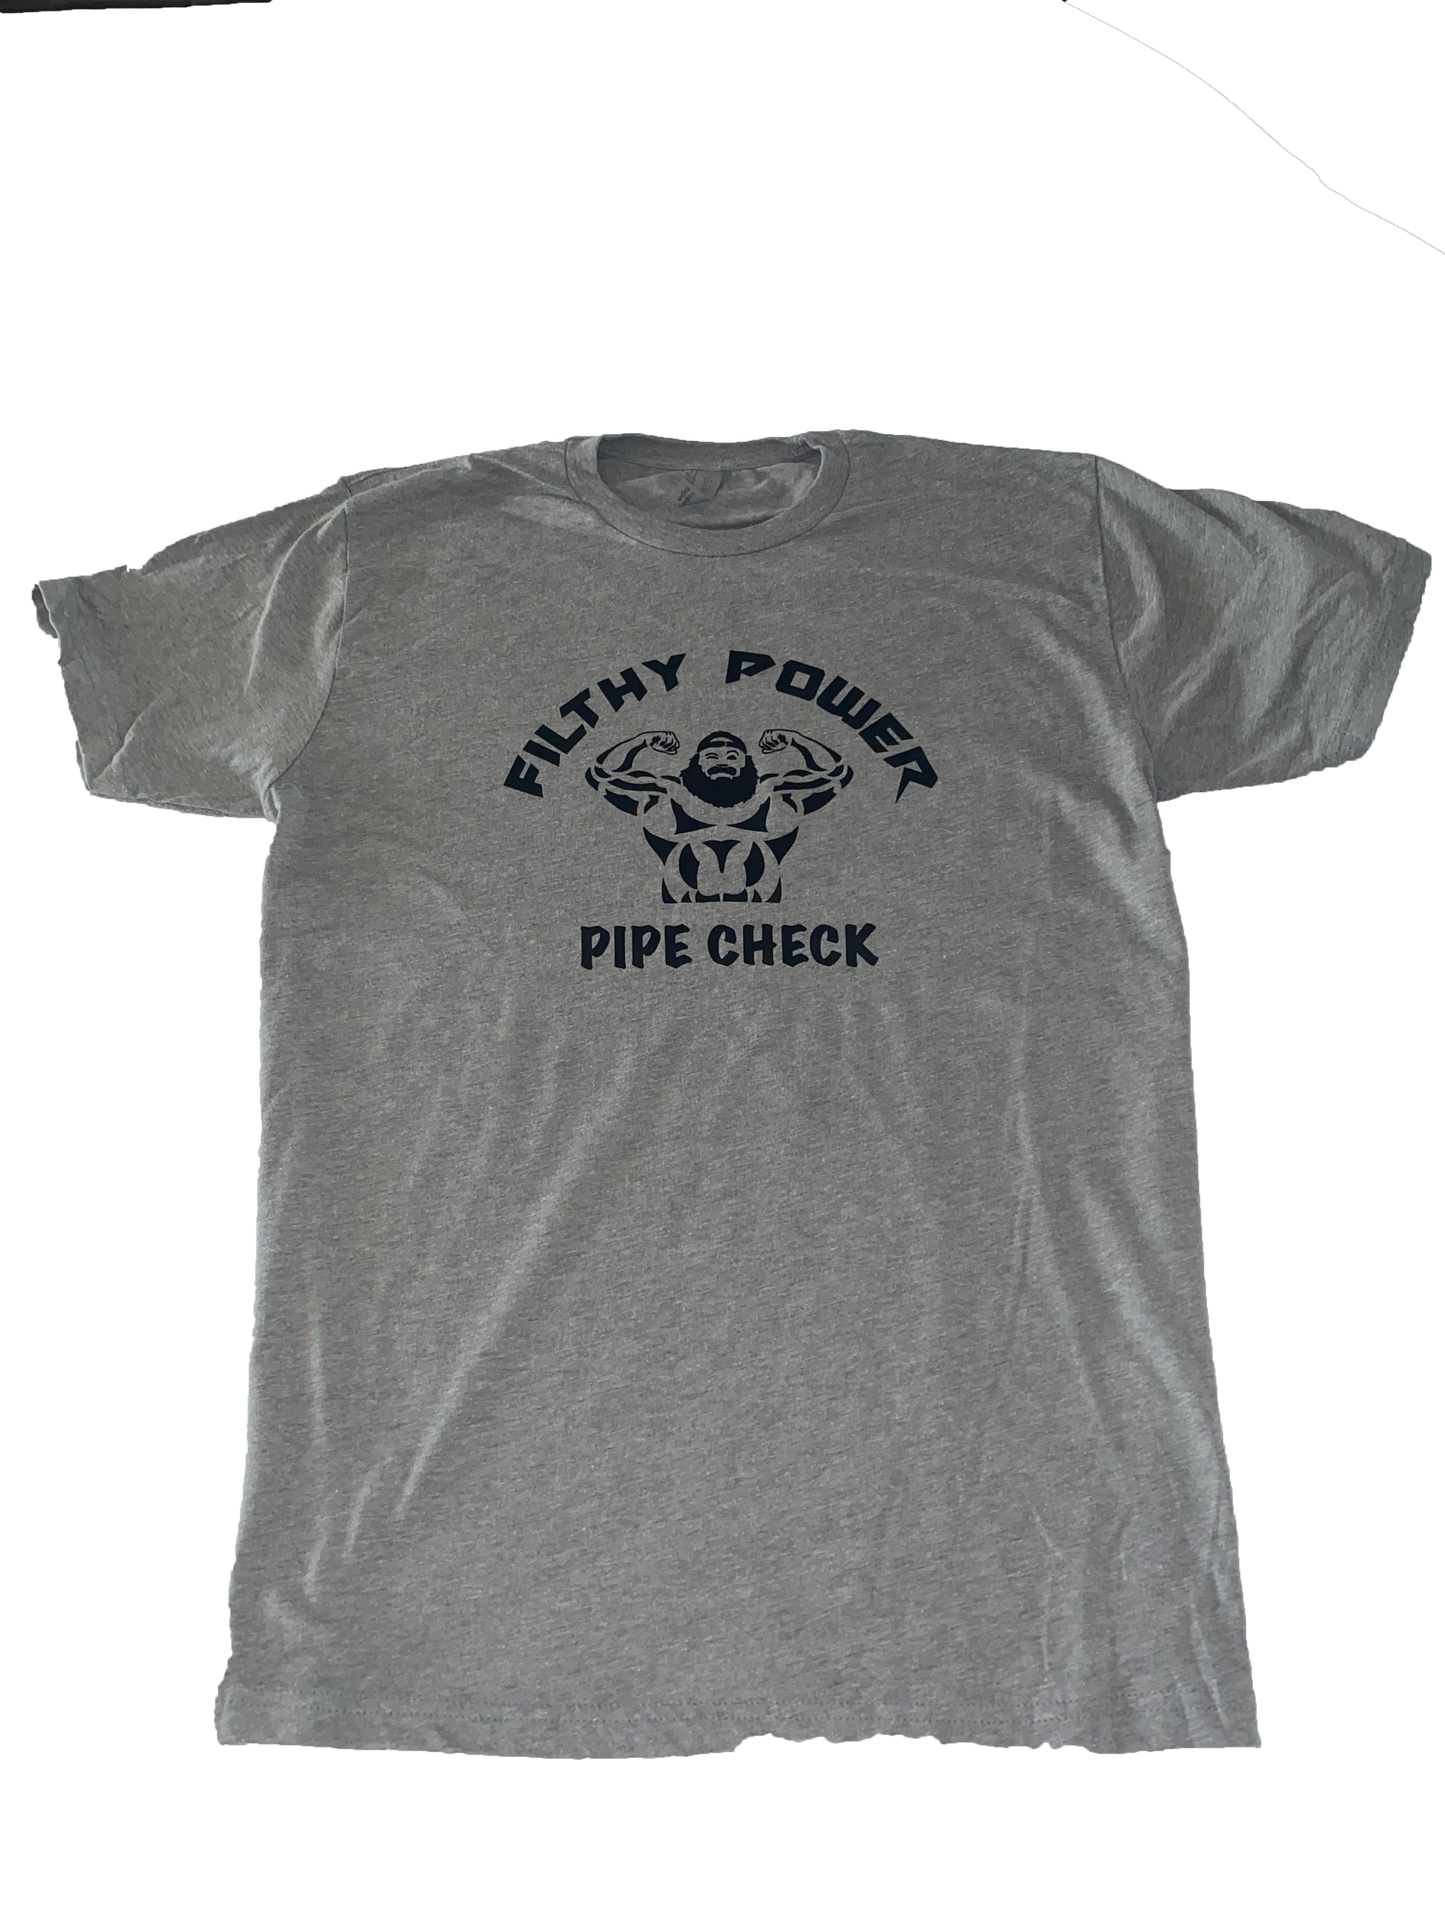 Filthy Power Pipe Check T-shirt